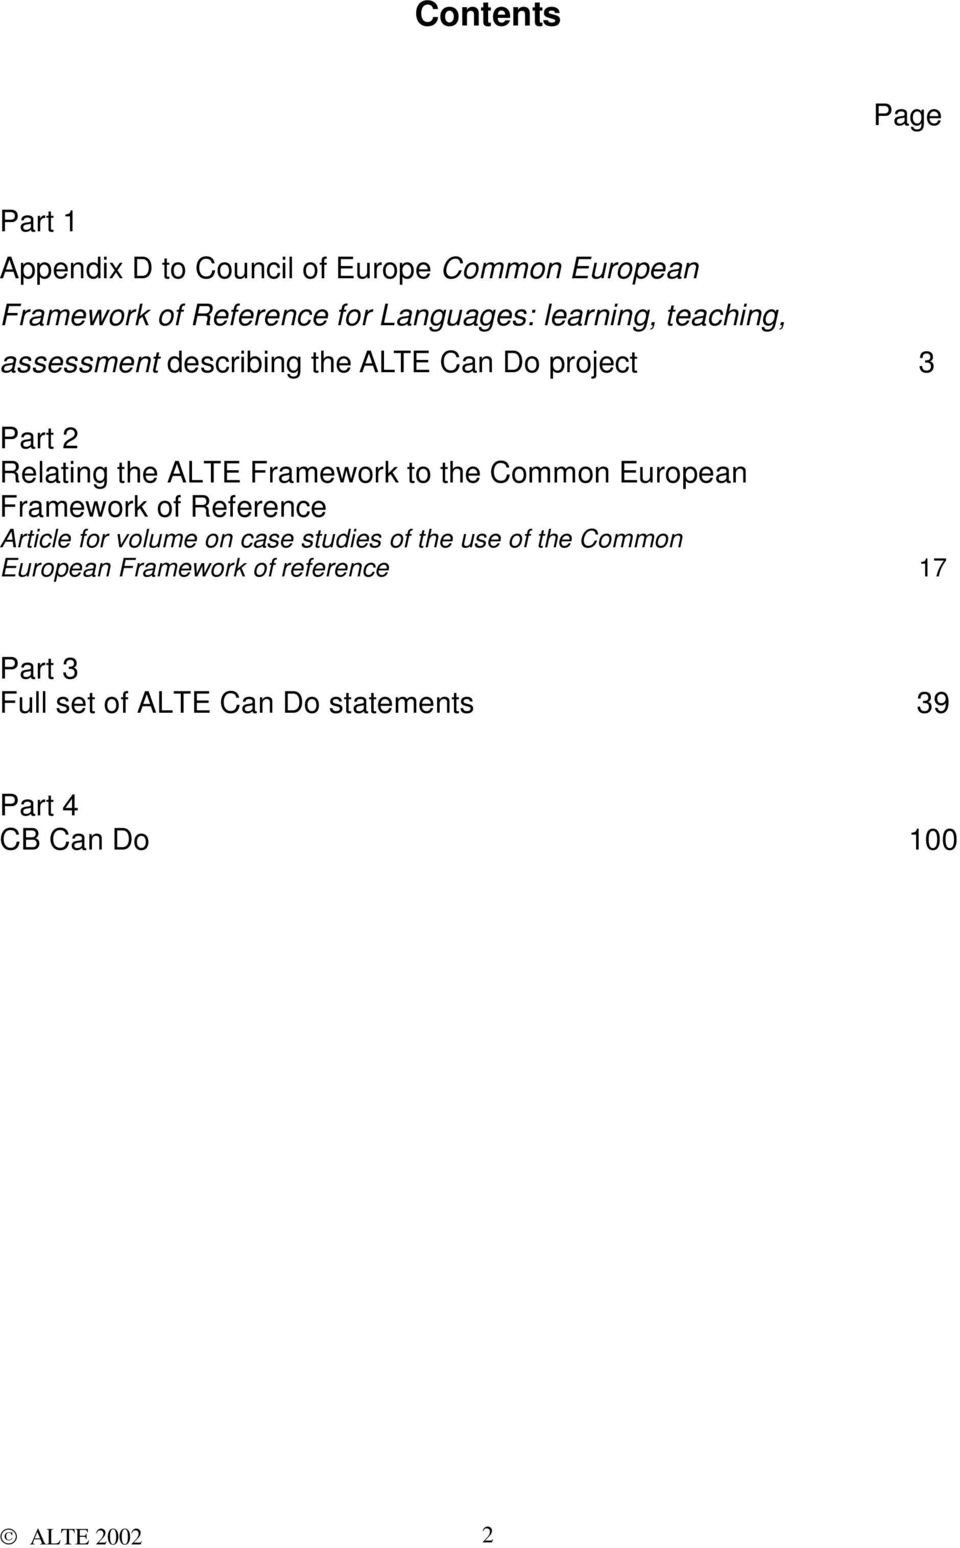 the Common European Framework of Reference Article for volume on case studies of the use of the Common